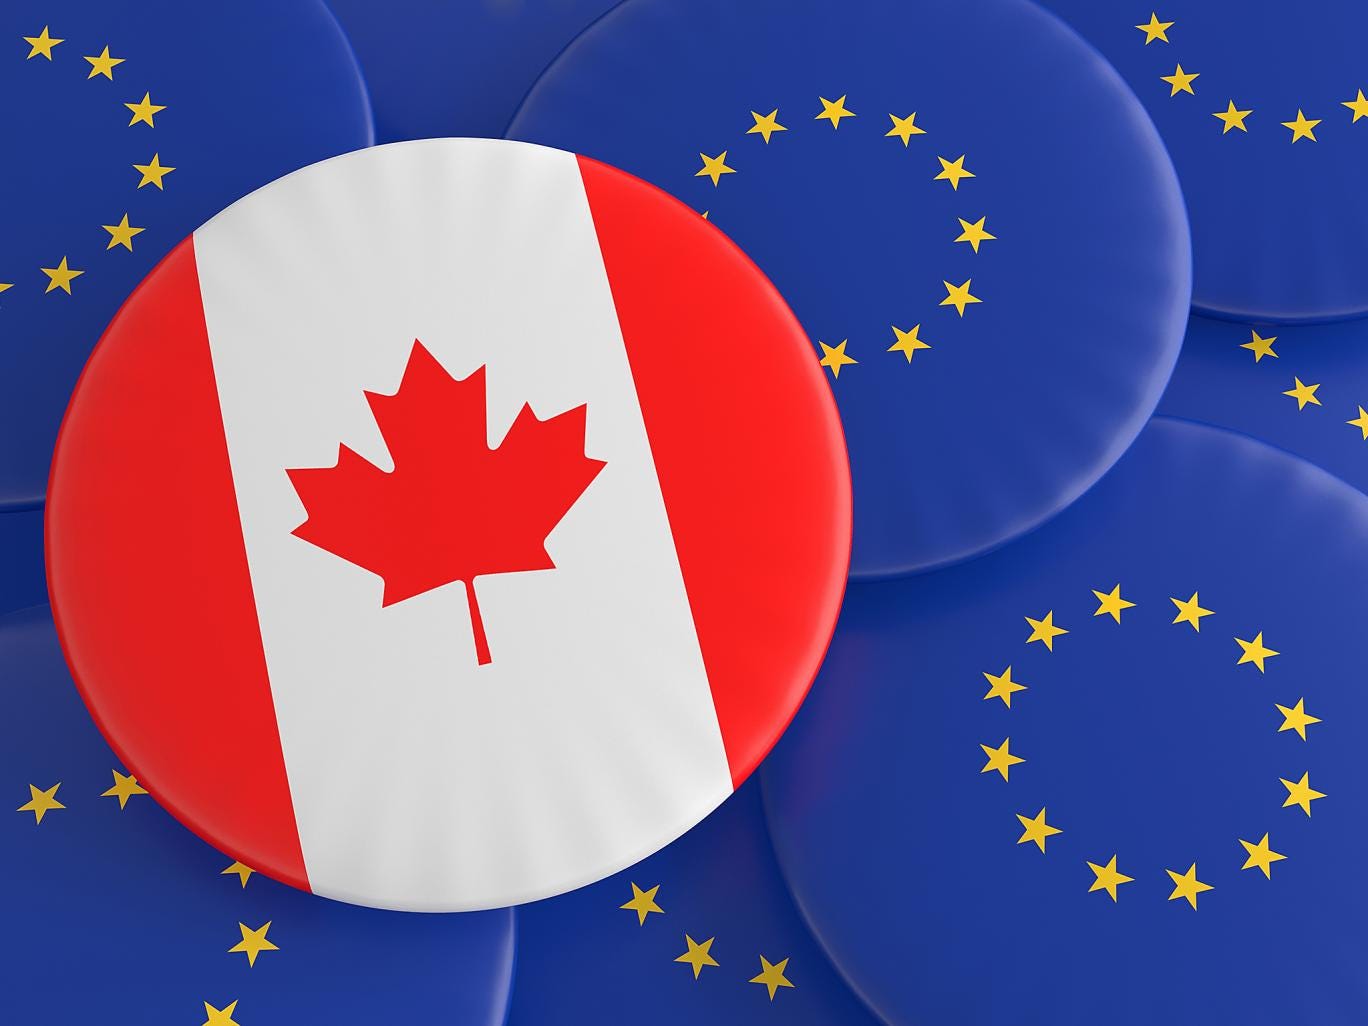 Ceta trade deal between EU and Canada will cost 300,000 jobs and cause greater inequality, study says